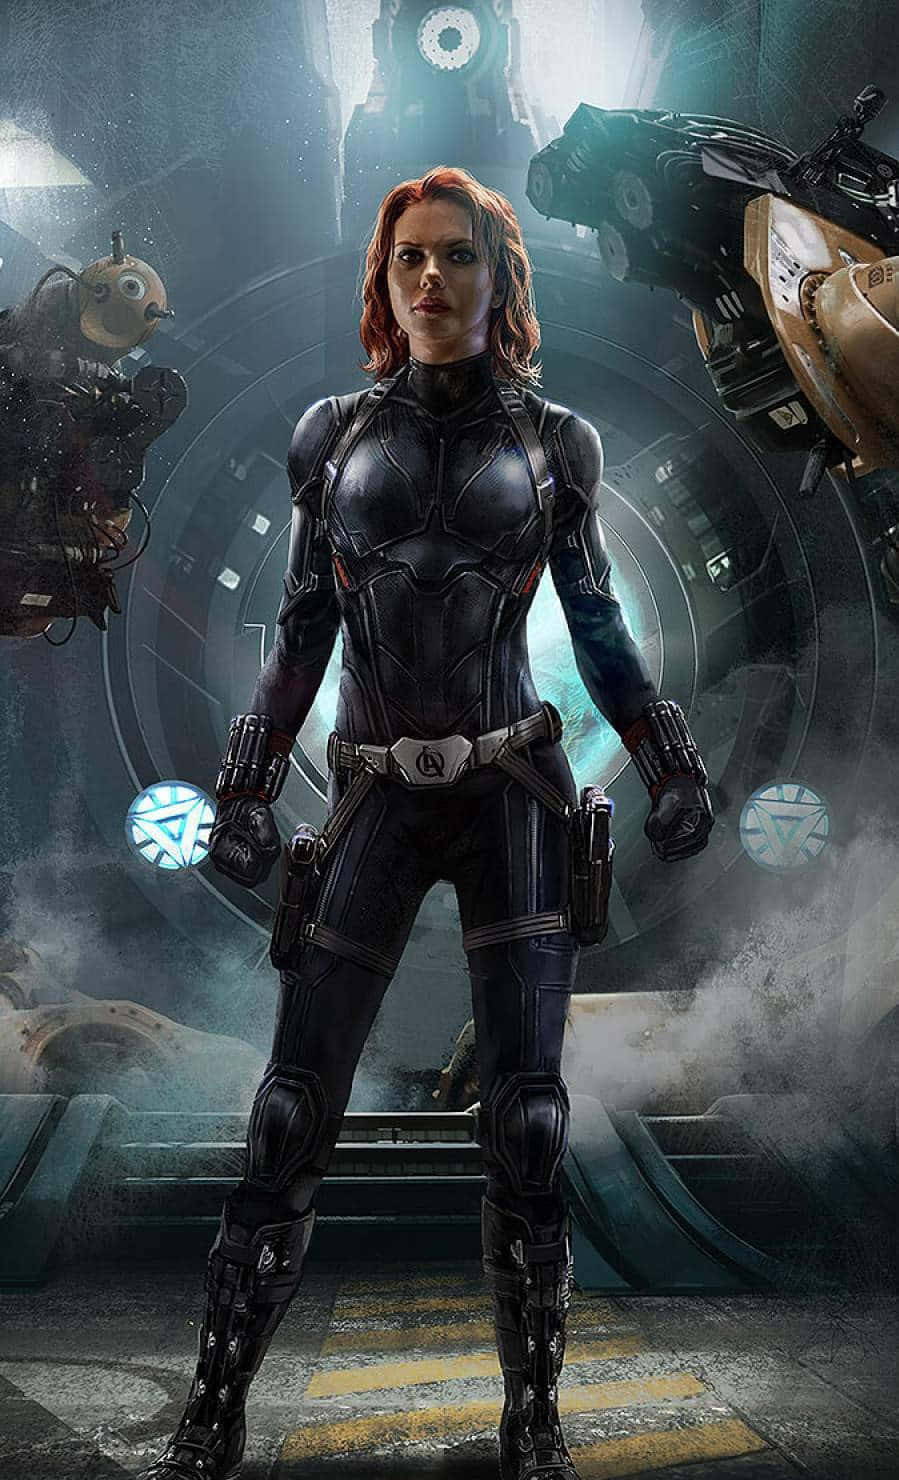 Add a bit of flash to your style with the Black Widow Iphone Wallpaper